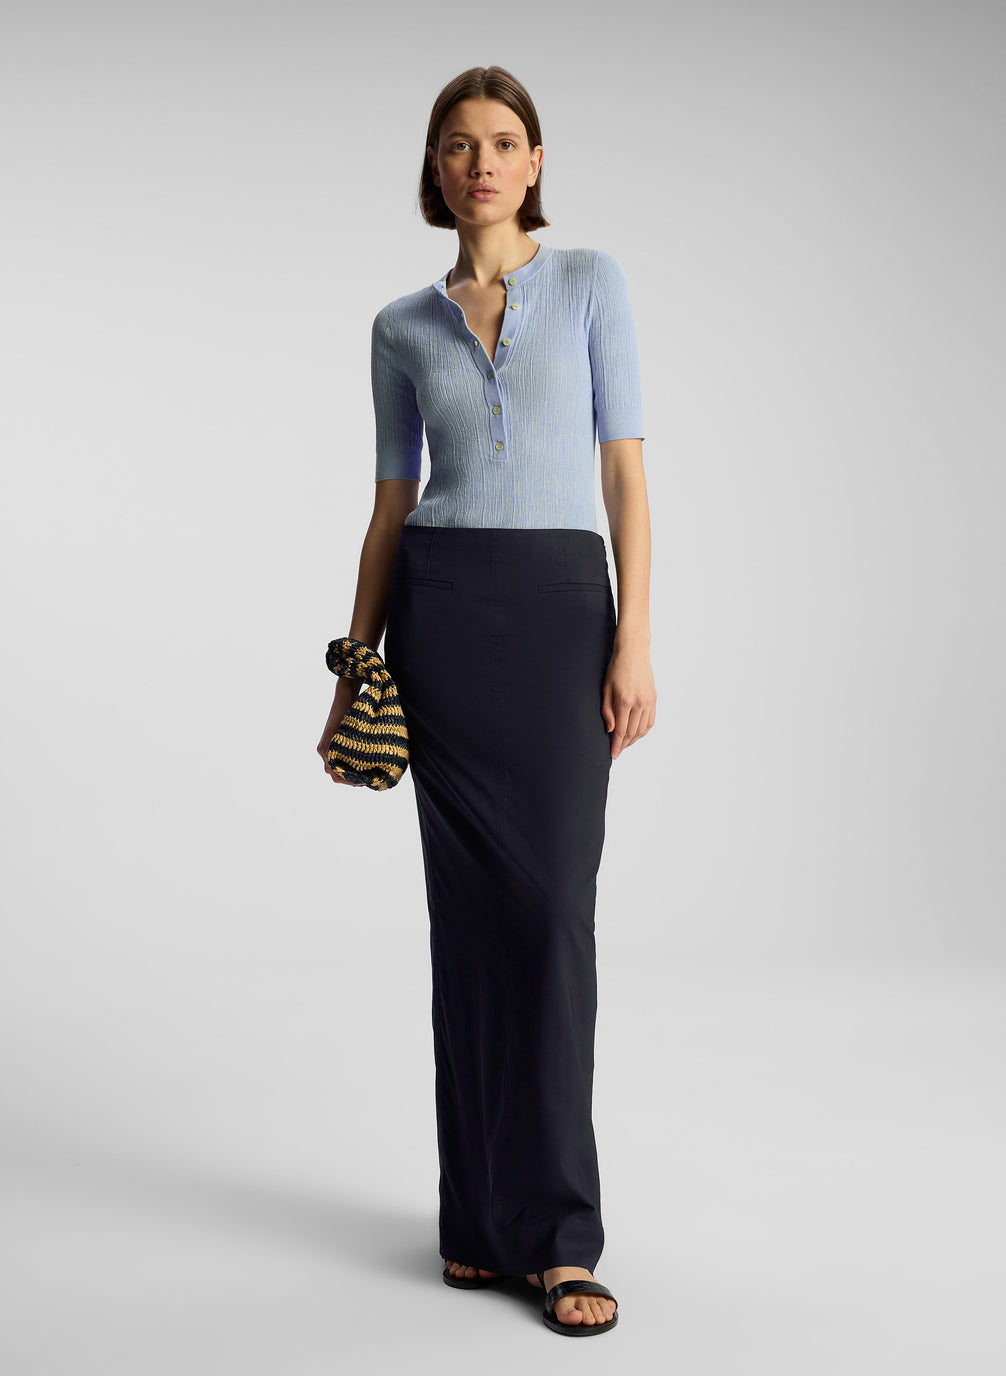 front view of woman wearing light blue shirt and navy blue maxi skirt